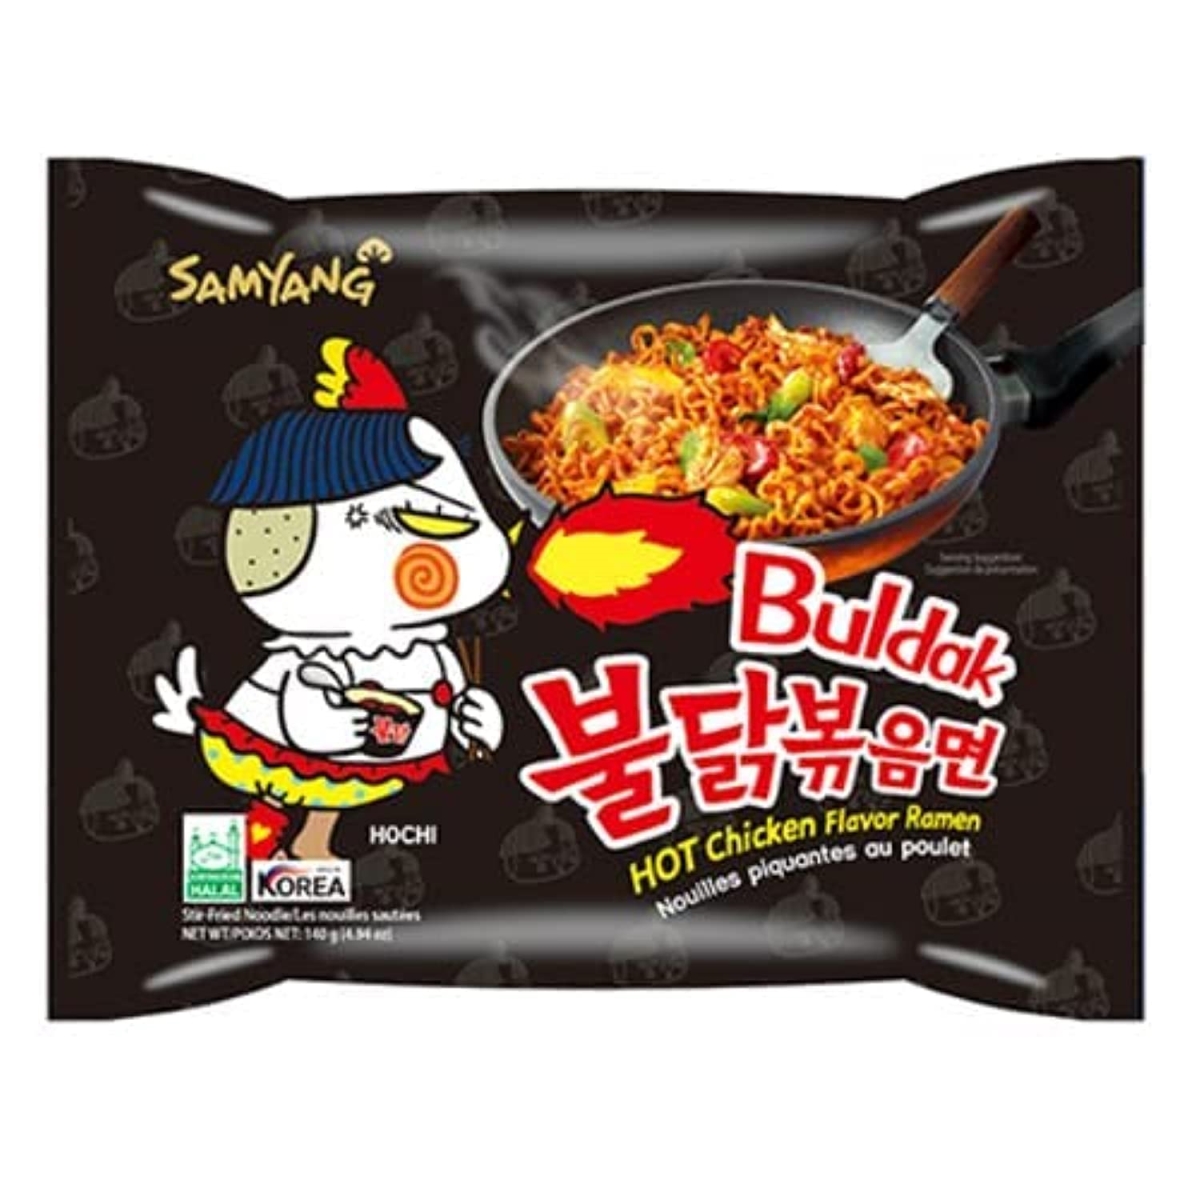 Picture of Samyang 381368 24.5 oz Original Spicy Chicken Roasted Ramen Noodles&#44; 5 per Pack - Pack of 8